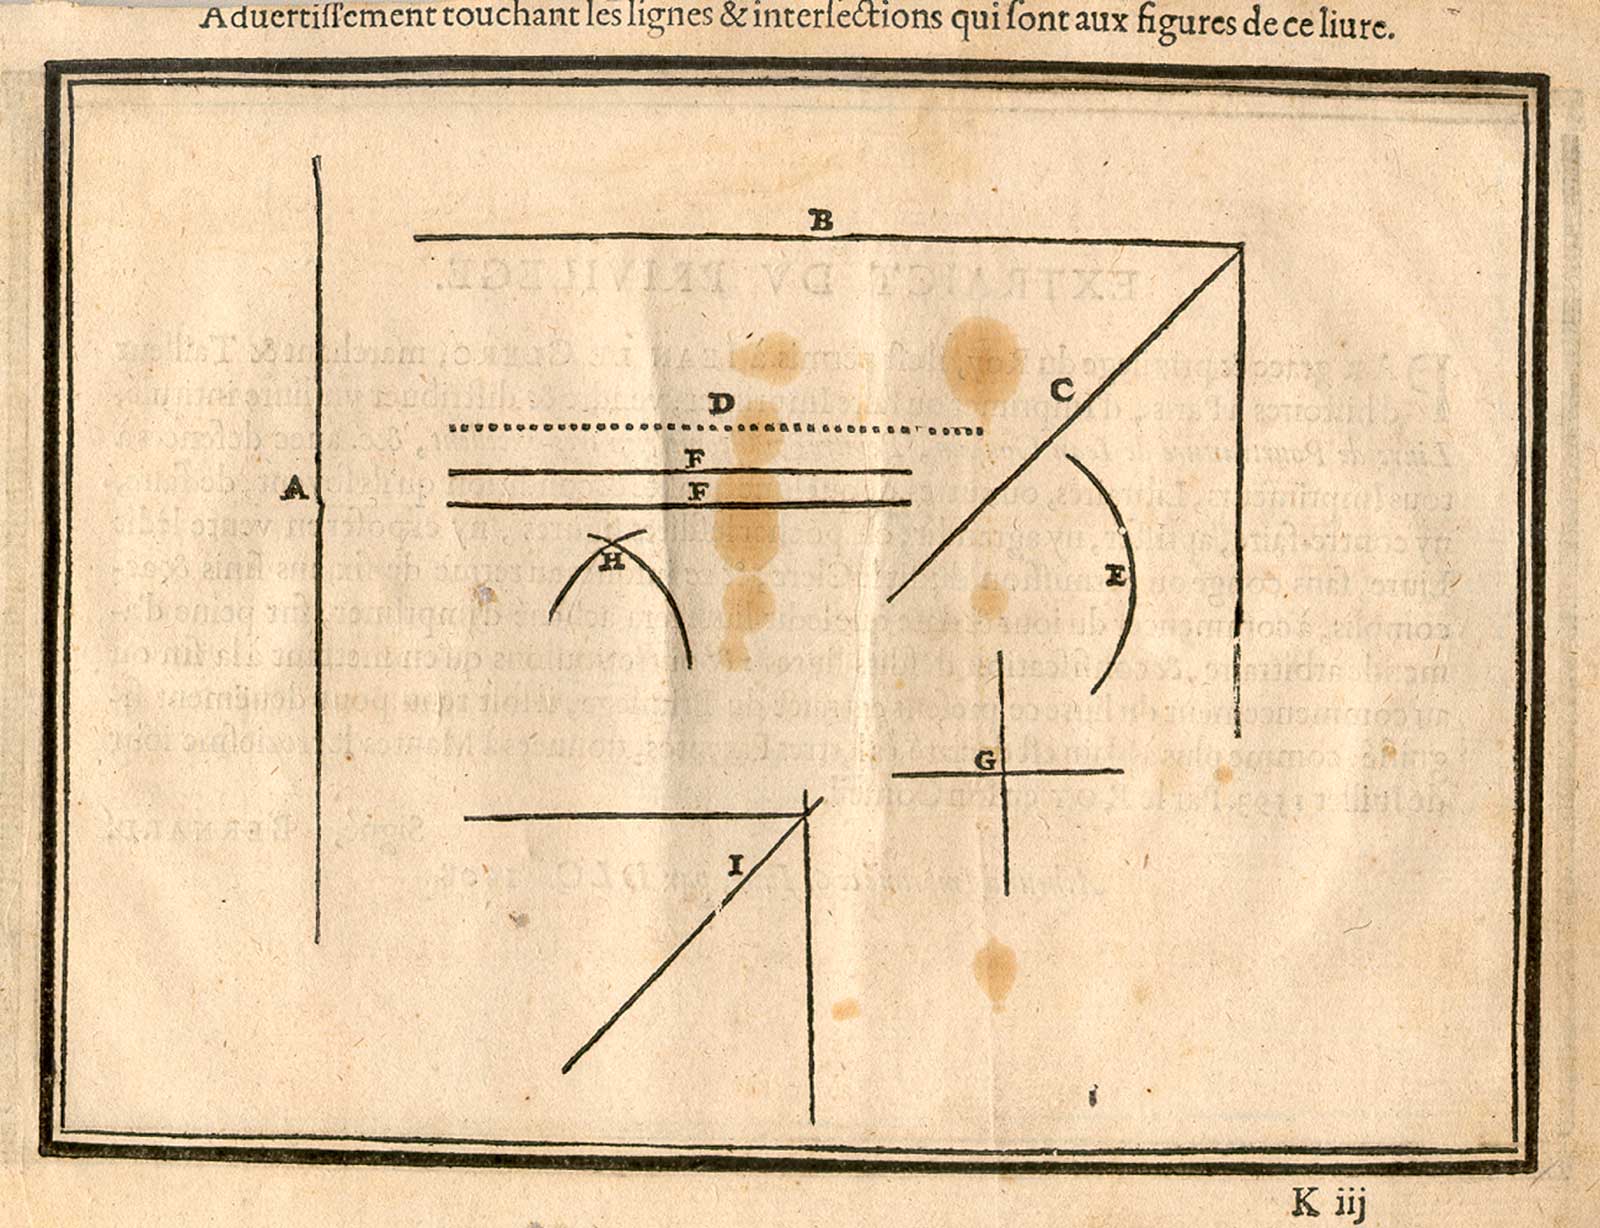 Woodcut illustration of the various lines, curves, and angles used in this book, from Jehan Cousin’s Livre de pourtraiture, NLM Call no.: WZ 250 C8673L 1608.